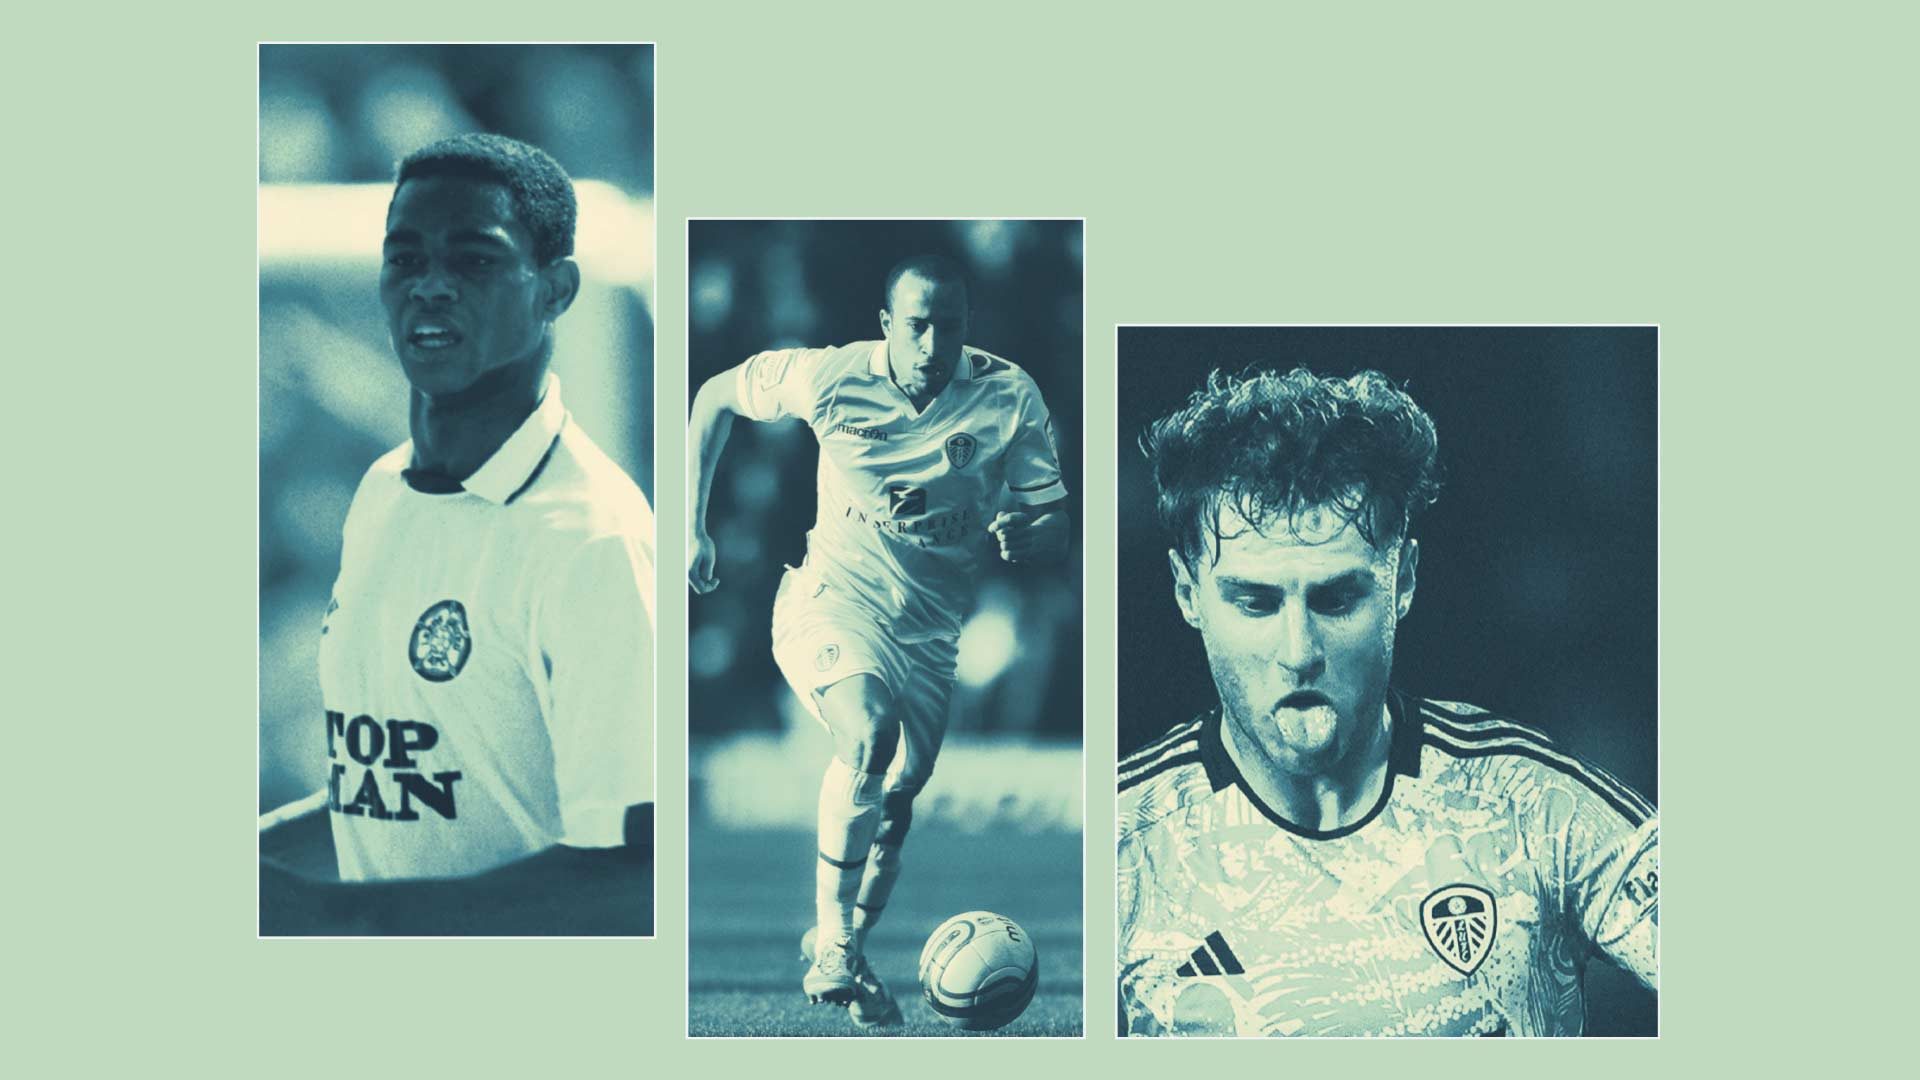 A collection of good, bad, and ugly Spurs loanees playing for Leeds: Chris Fairclough, Andros Townsend, and Joe Rodon (sorry Joe, just keep your tongue in your mouth for once)